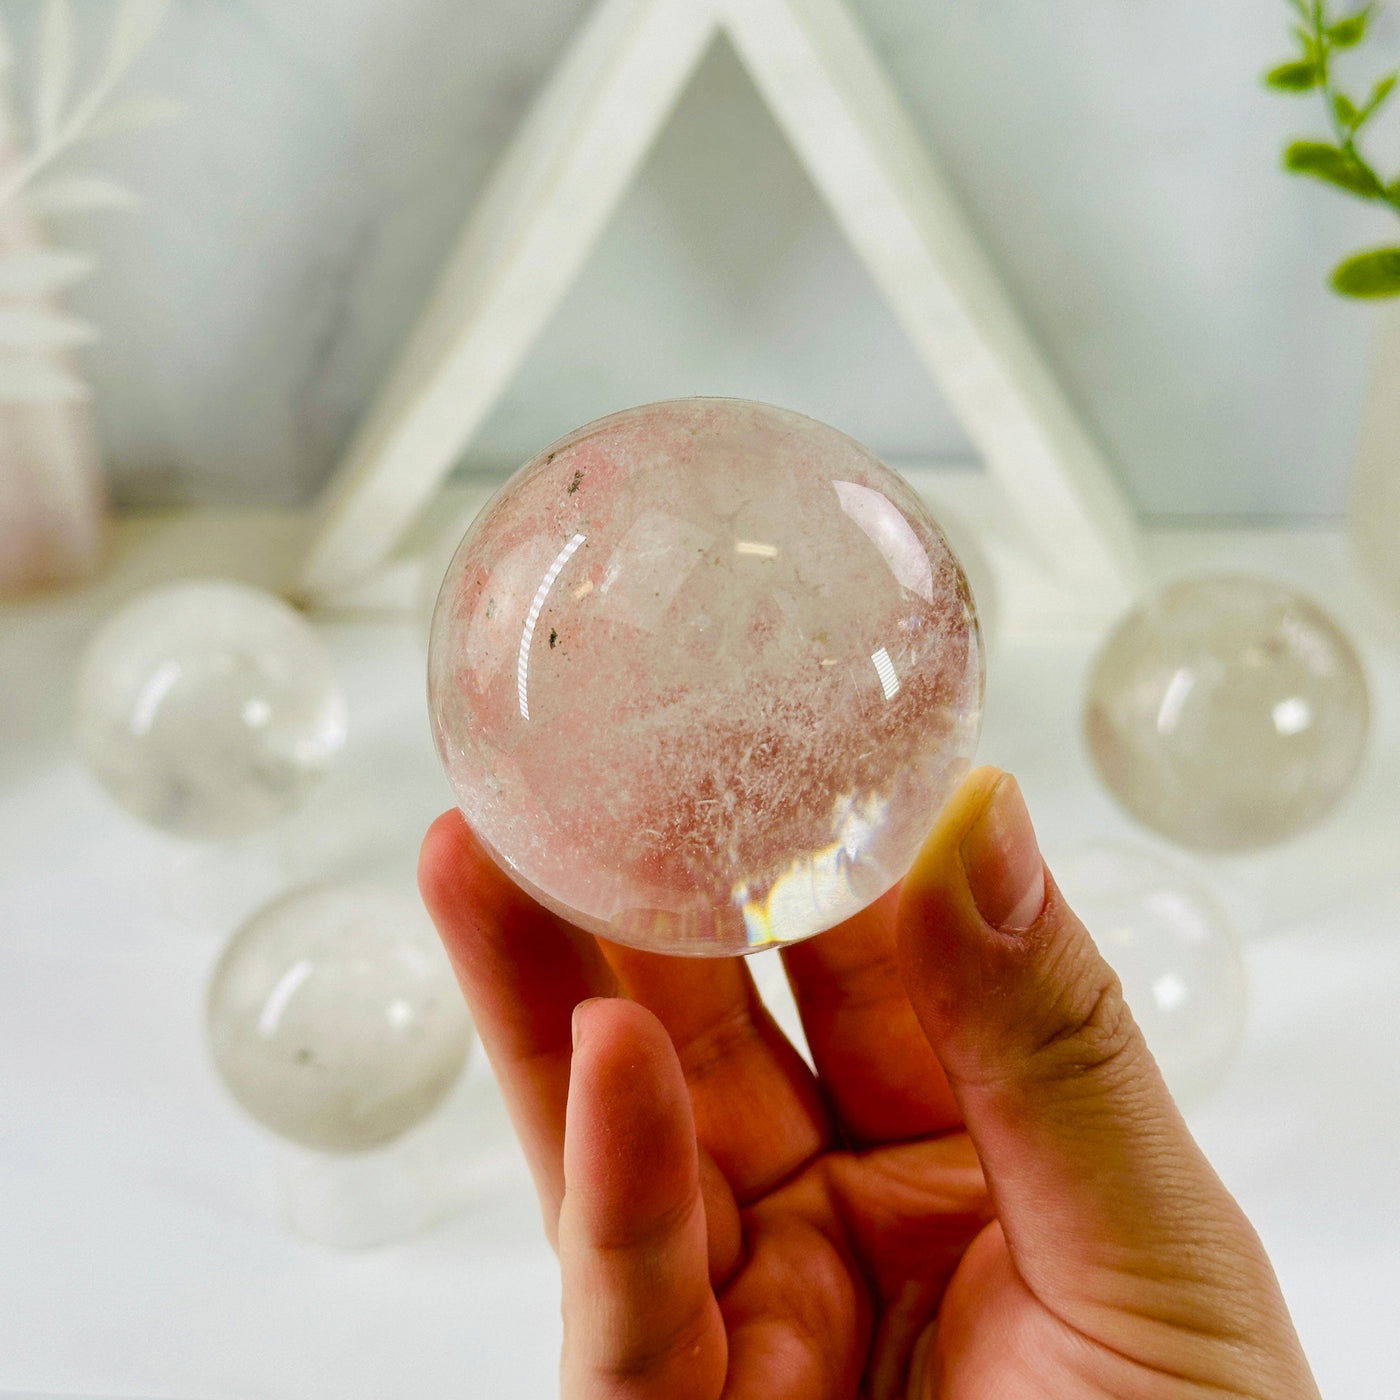 Crystal Quartz Sphere - Crystal Ball - You Choose variant 1 in hand for size reference